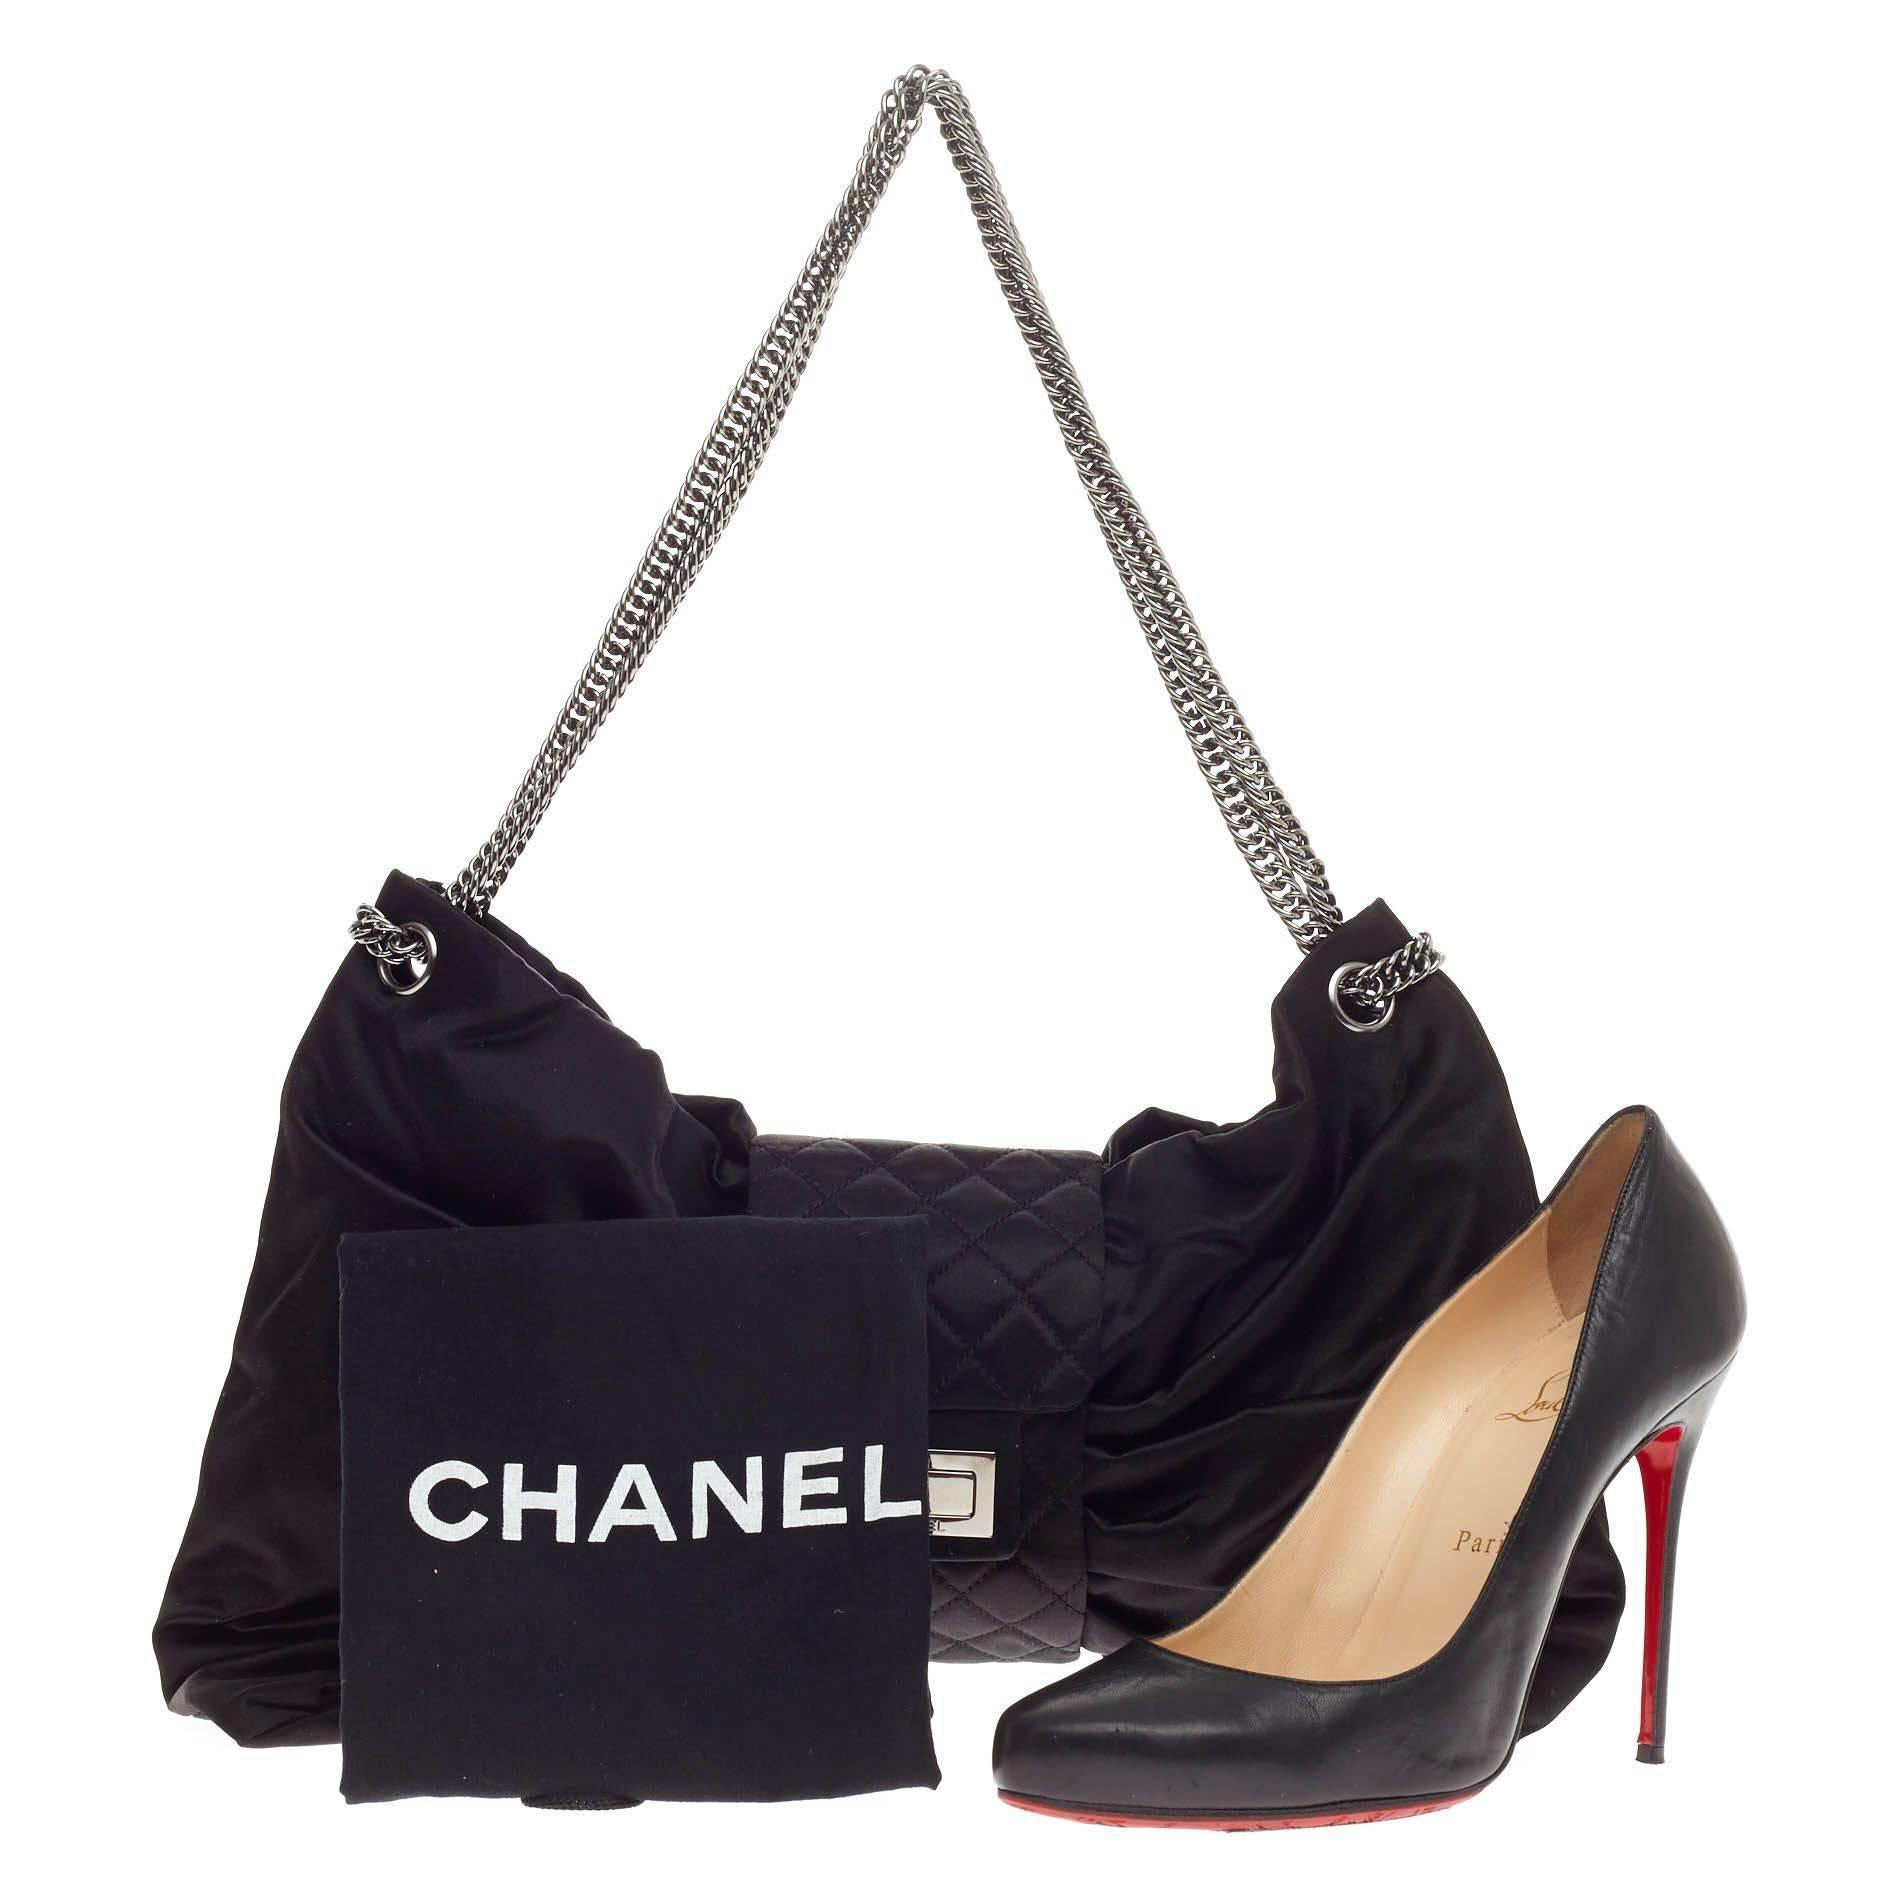 This authentic Chanel Bow Bag Satin Large presented in the brand's Spring/Summer 2008 Collection is  stylish and luxurious in design perfect for day to evening look. Crafted from soft black satin, this unique bow bag features Chanel's signature